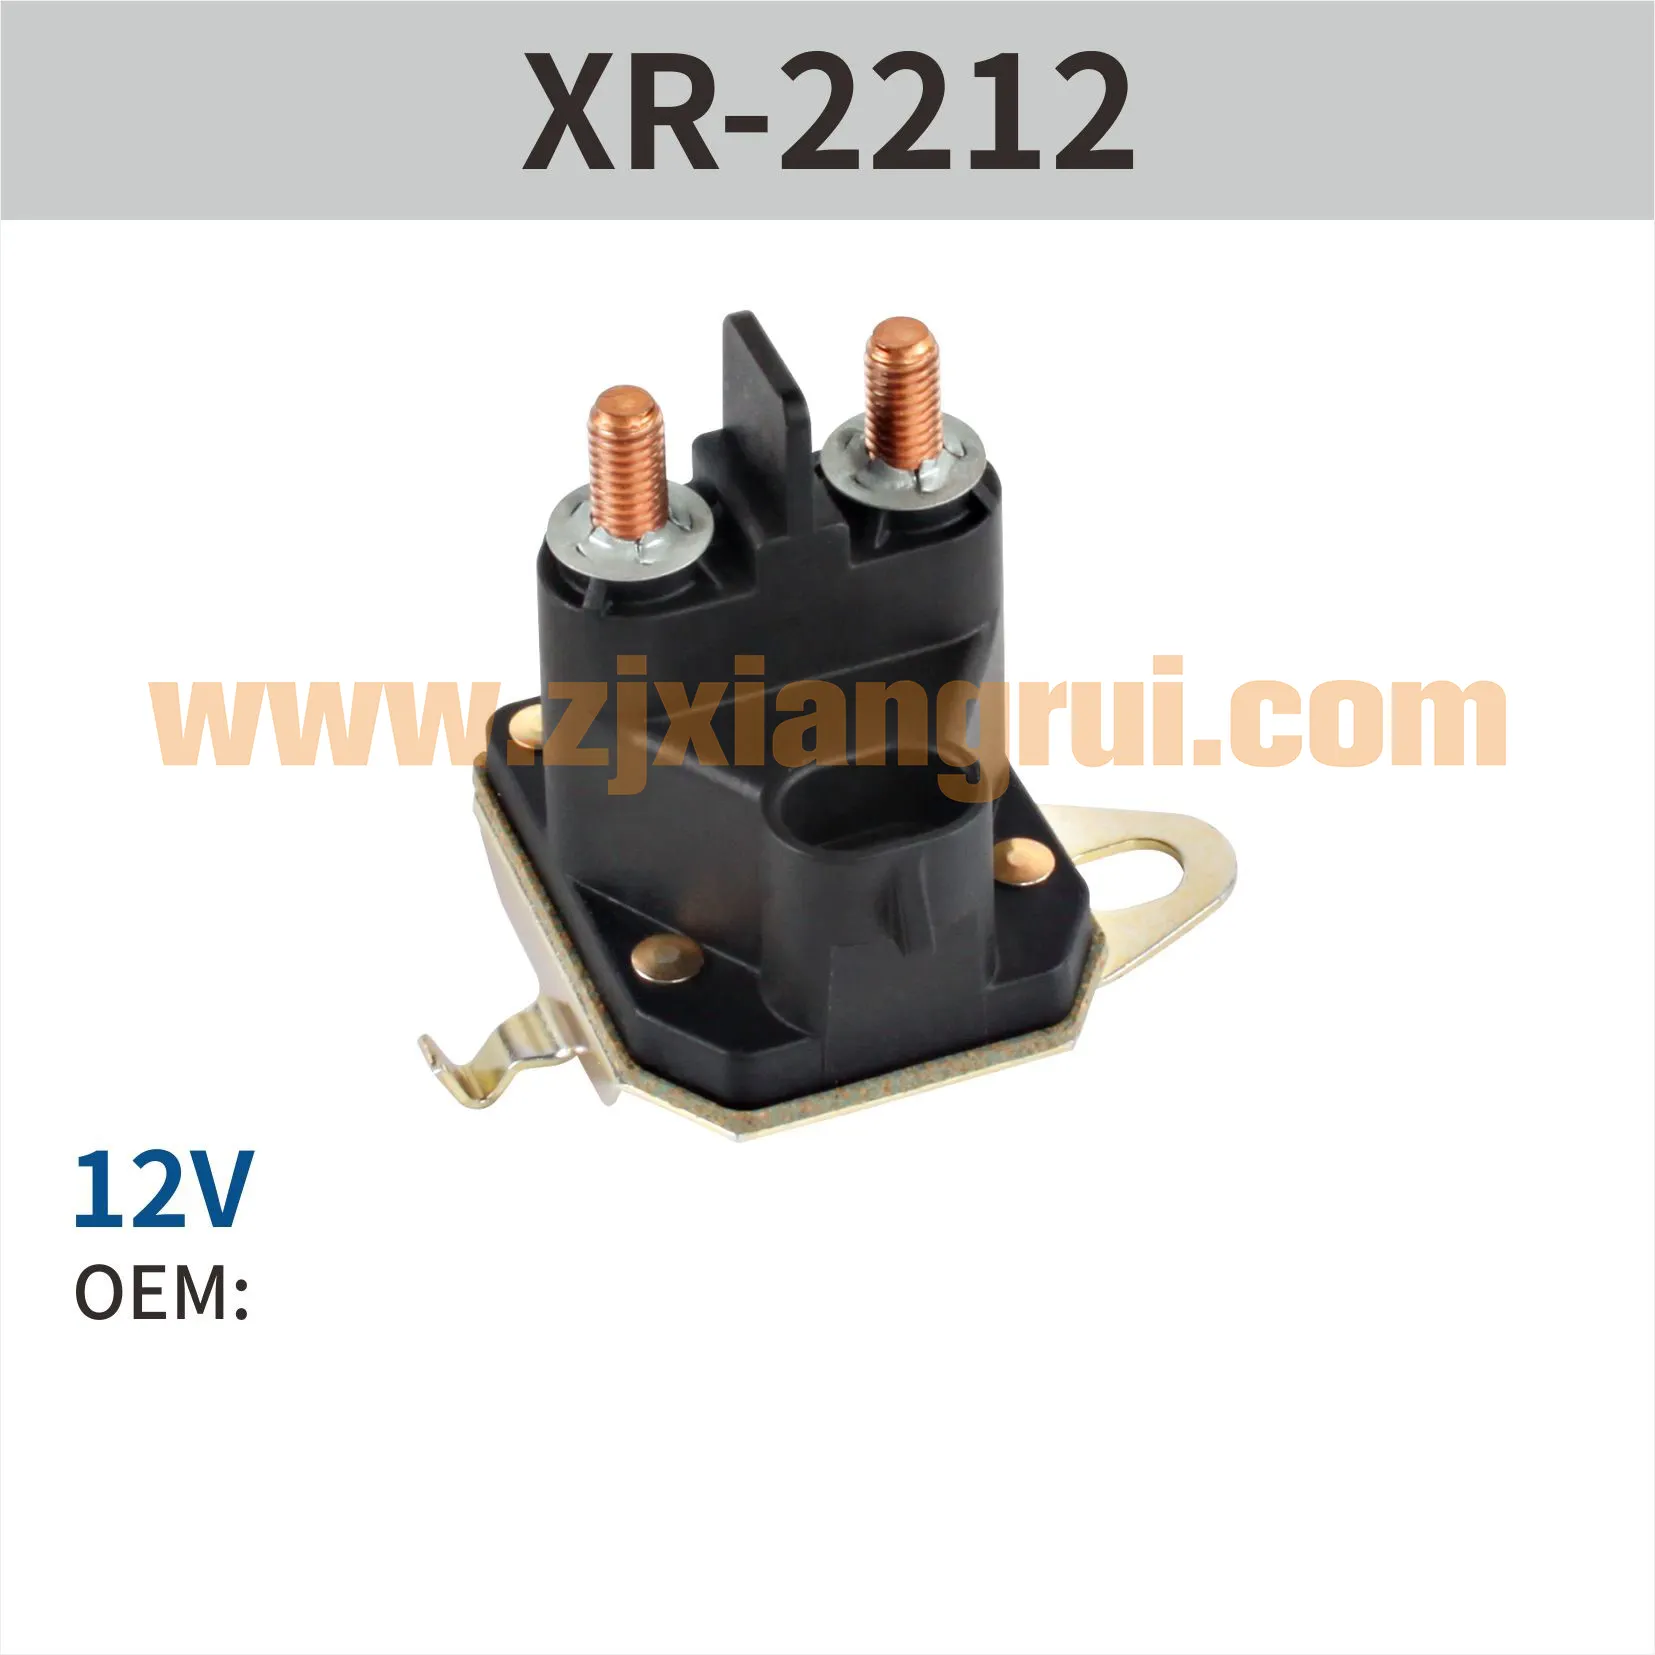 Starter relay for Arctic Cat Snowmobile High Quality & Factory Price